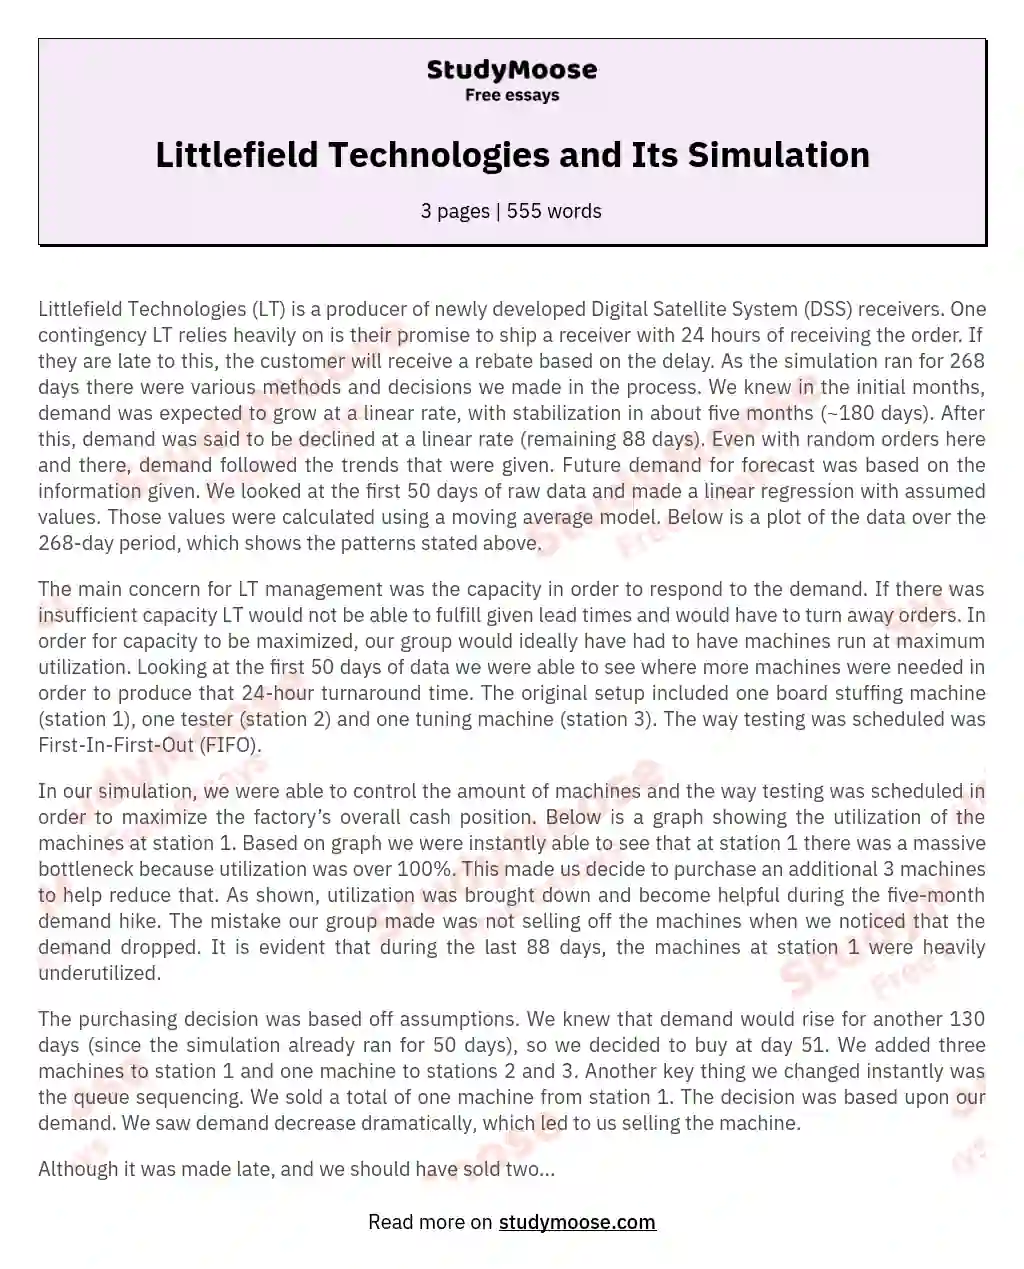 Littlefield Technologies and Its Simulation essay